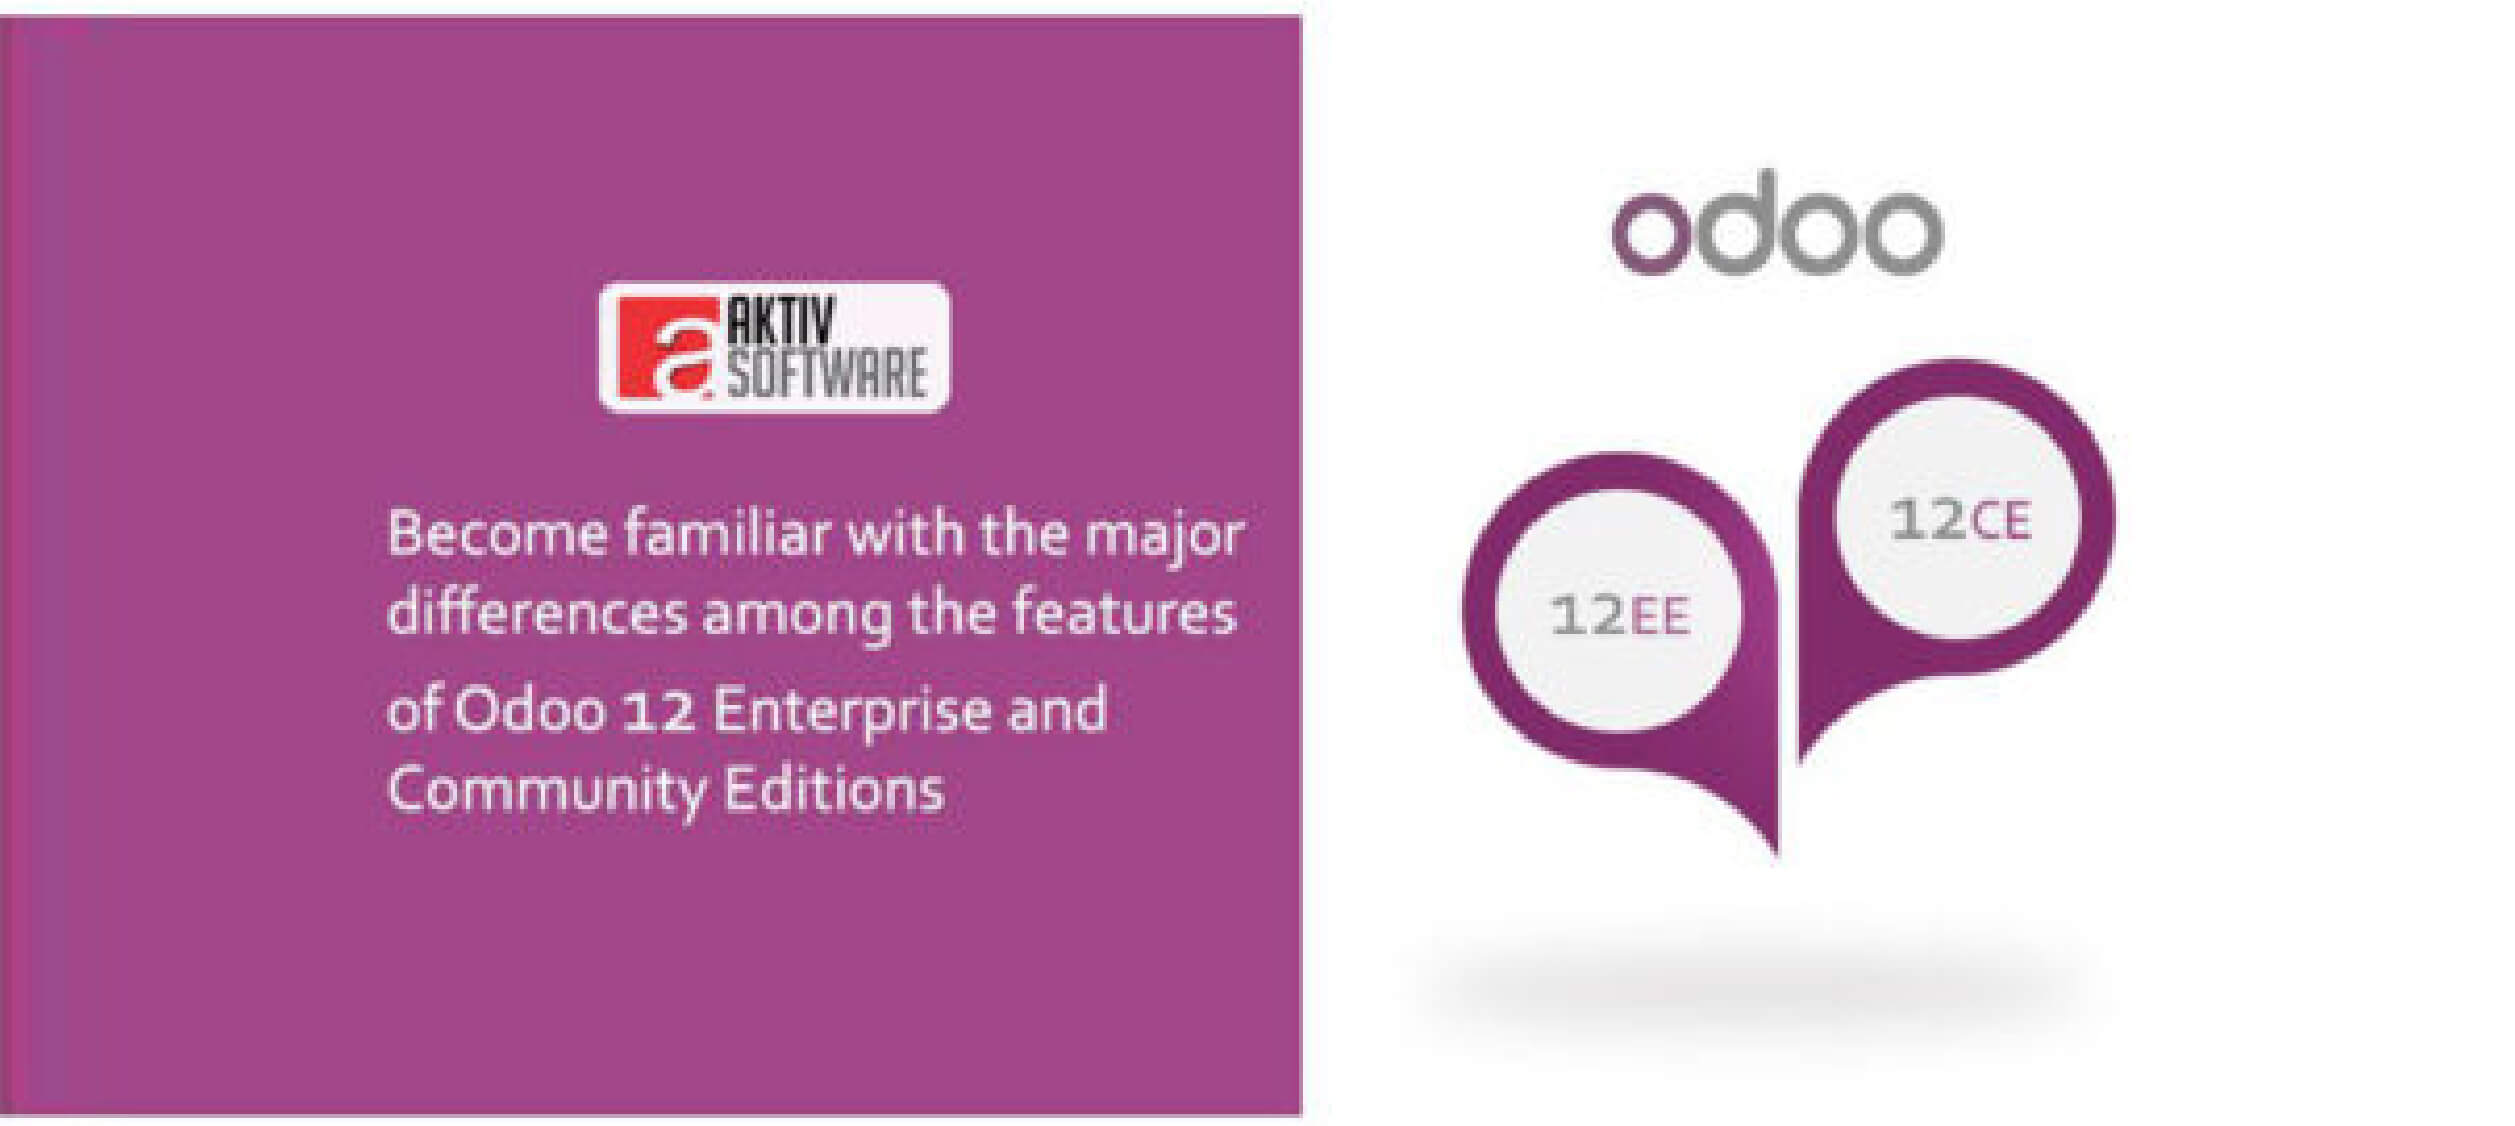 compare-matrix-for-the-features-of-odoo-12-enterprise-vs-community-editions